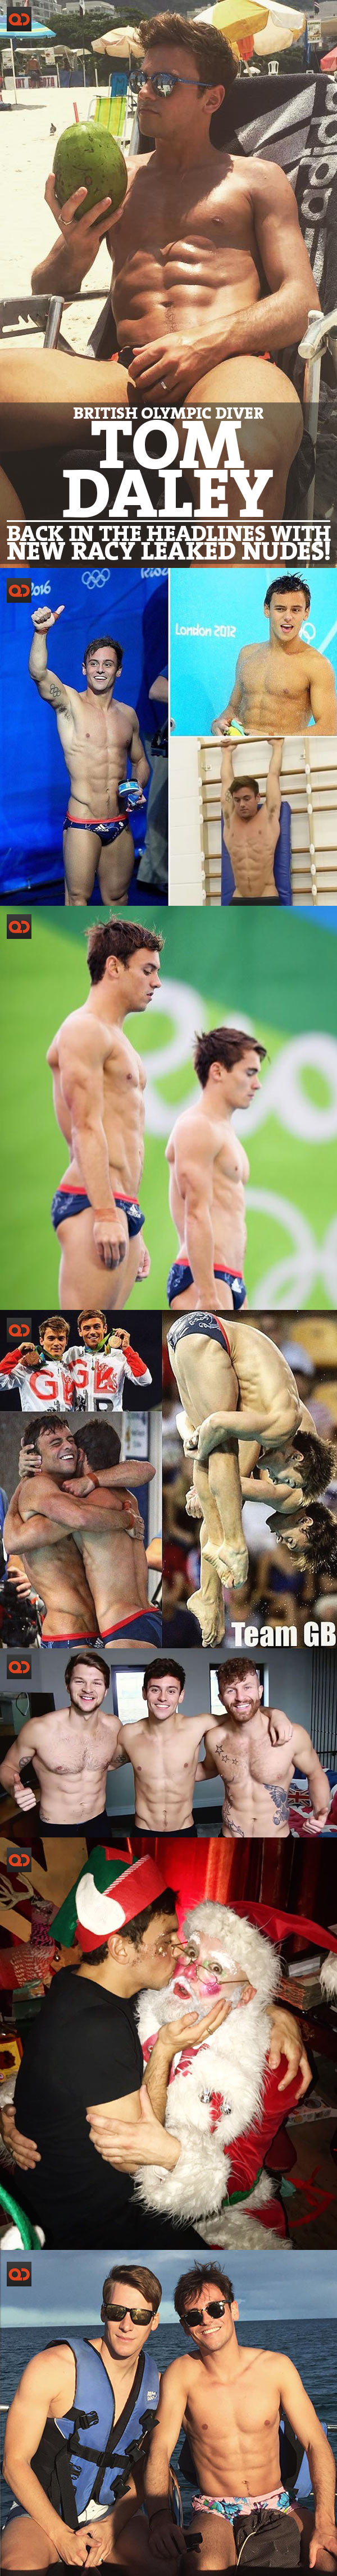 British Olympic Diver Tom Daley Back In The Headlines With New Racy Leaked Nudes!